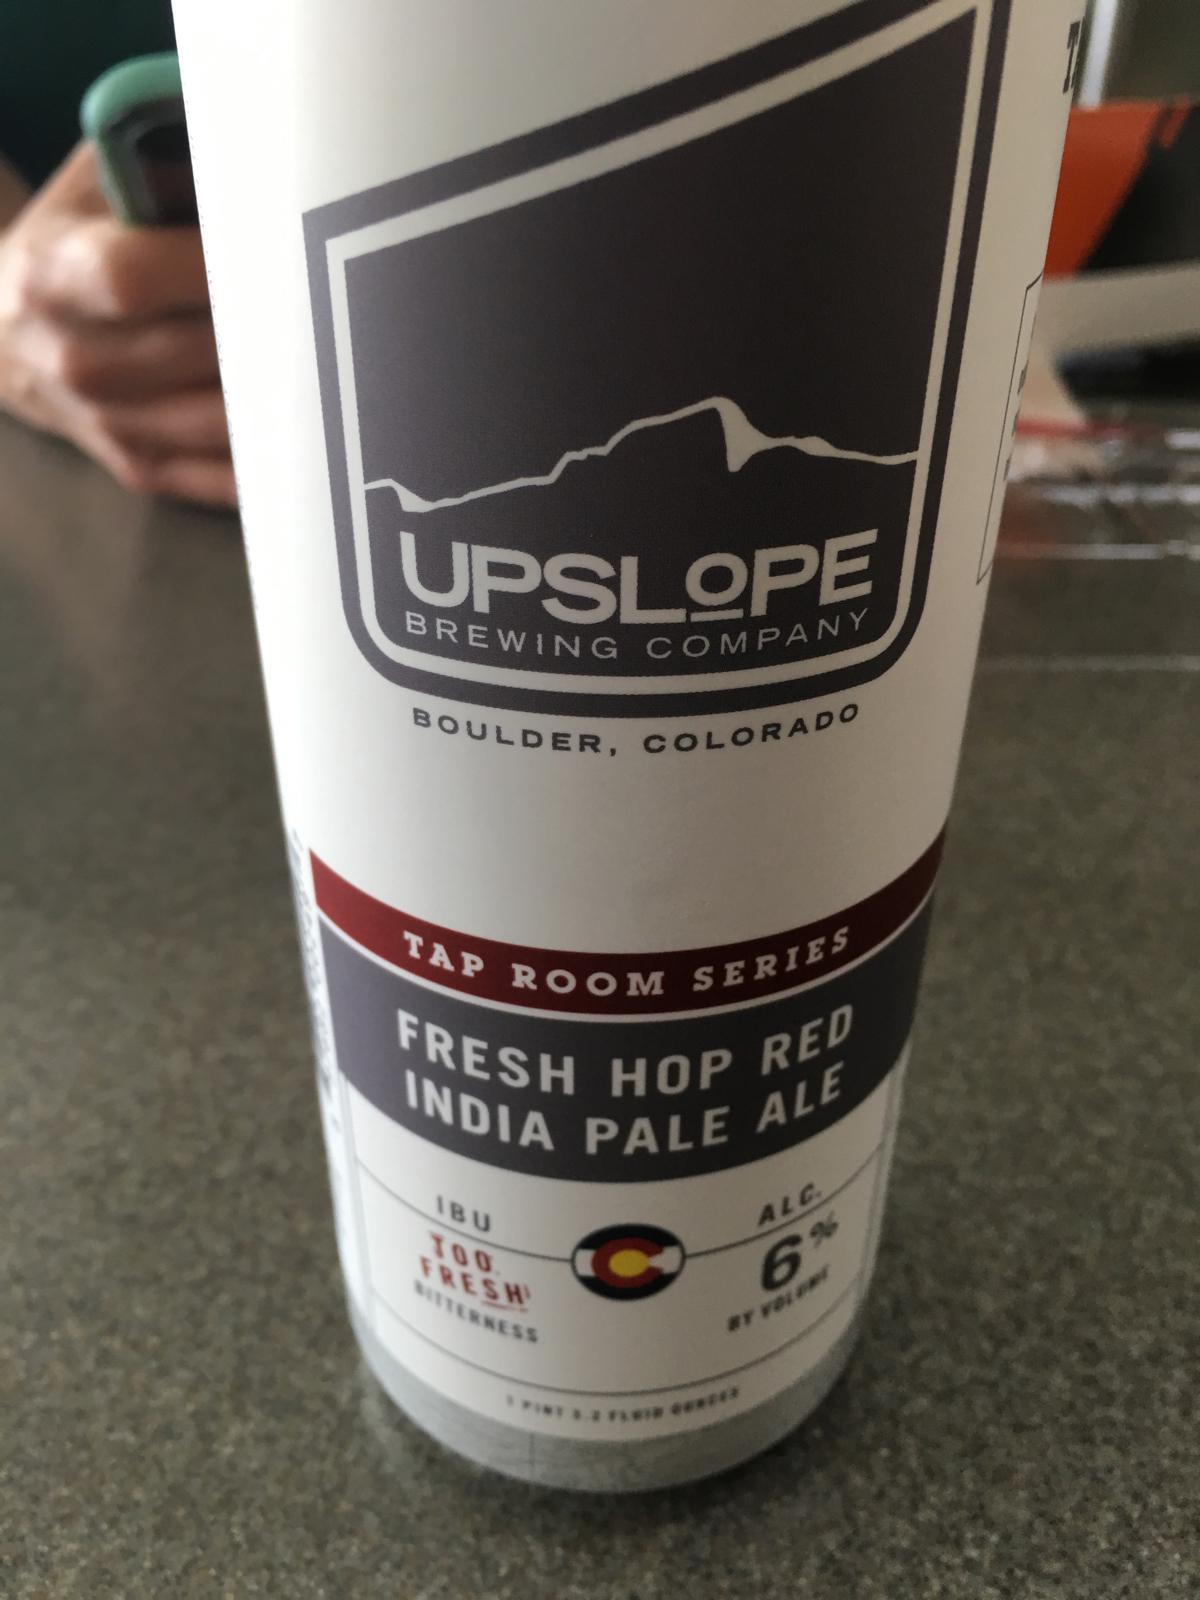 Tap Room Series:  Fresh Hop Red India Pale Ale